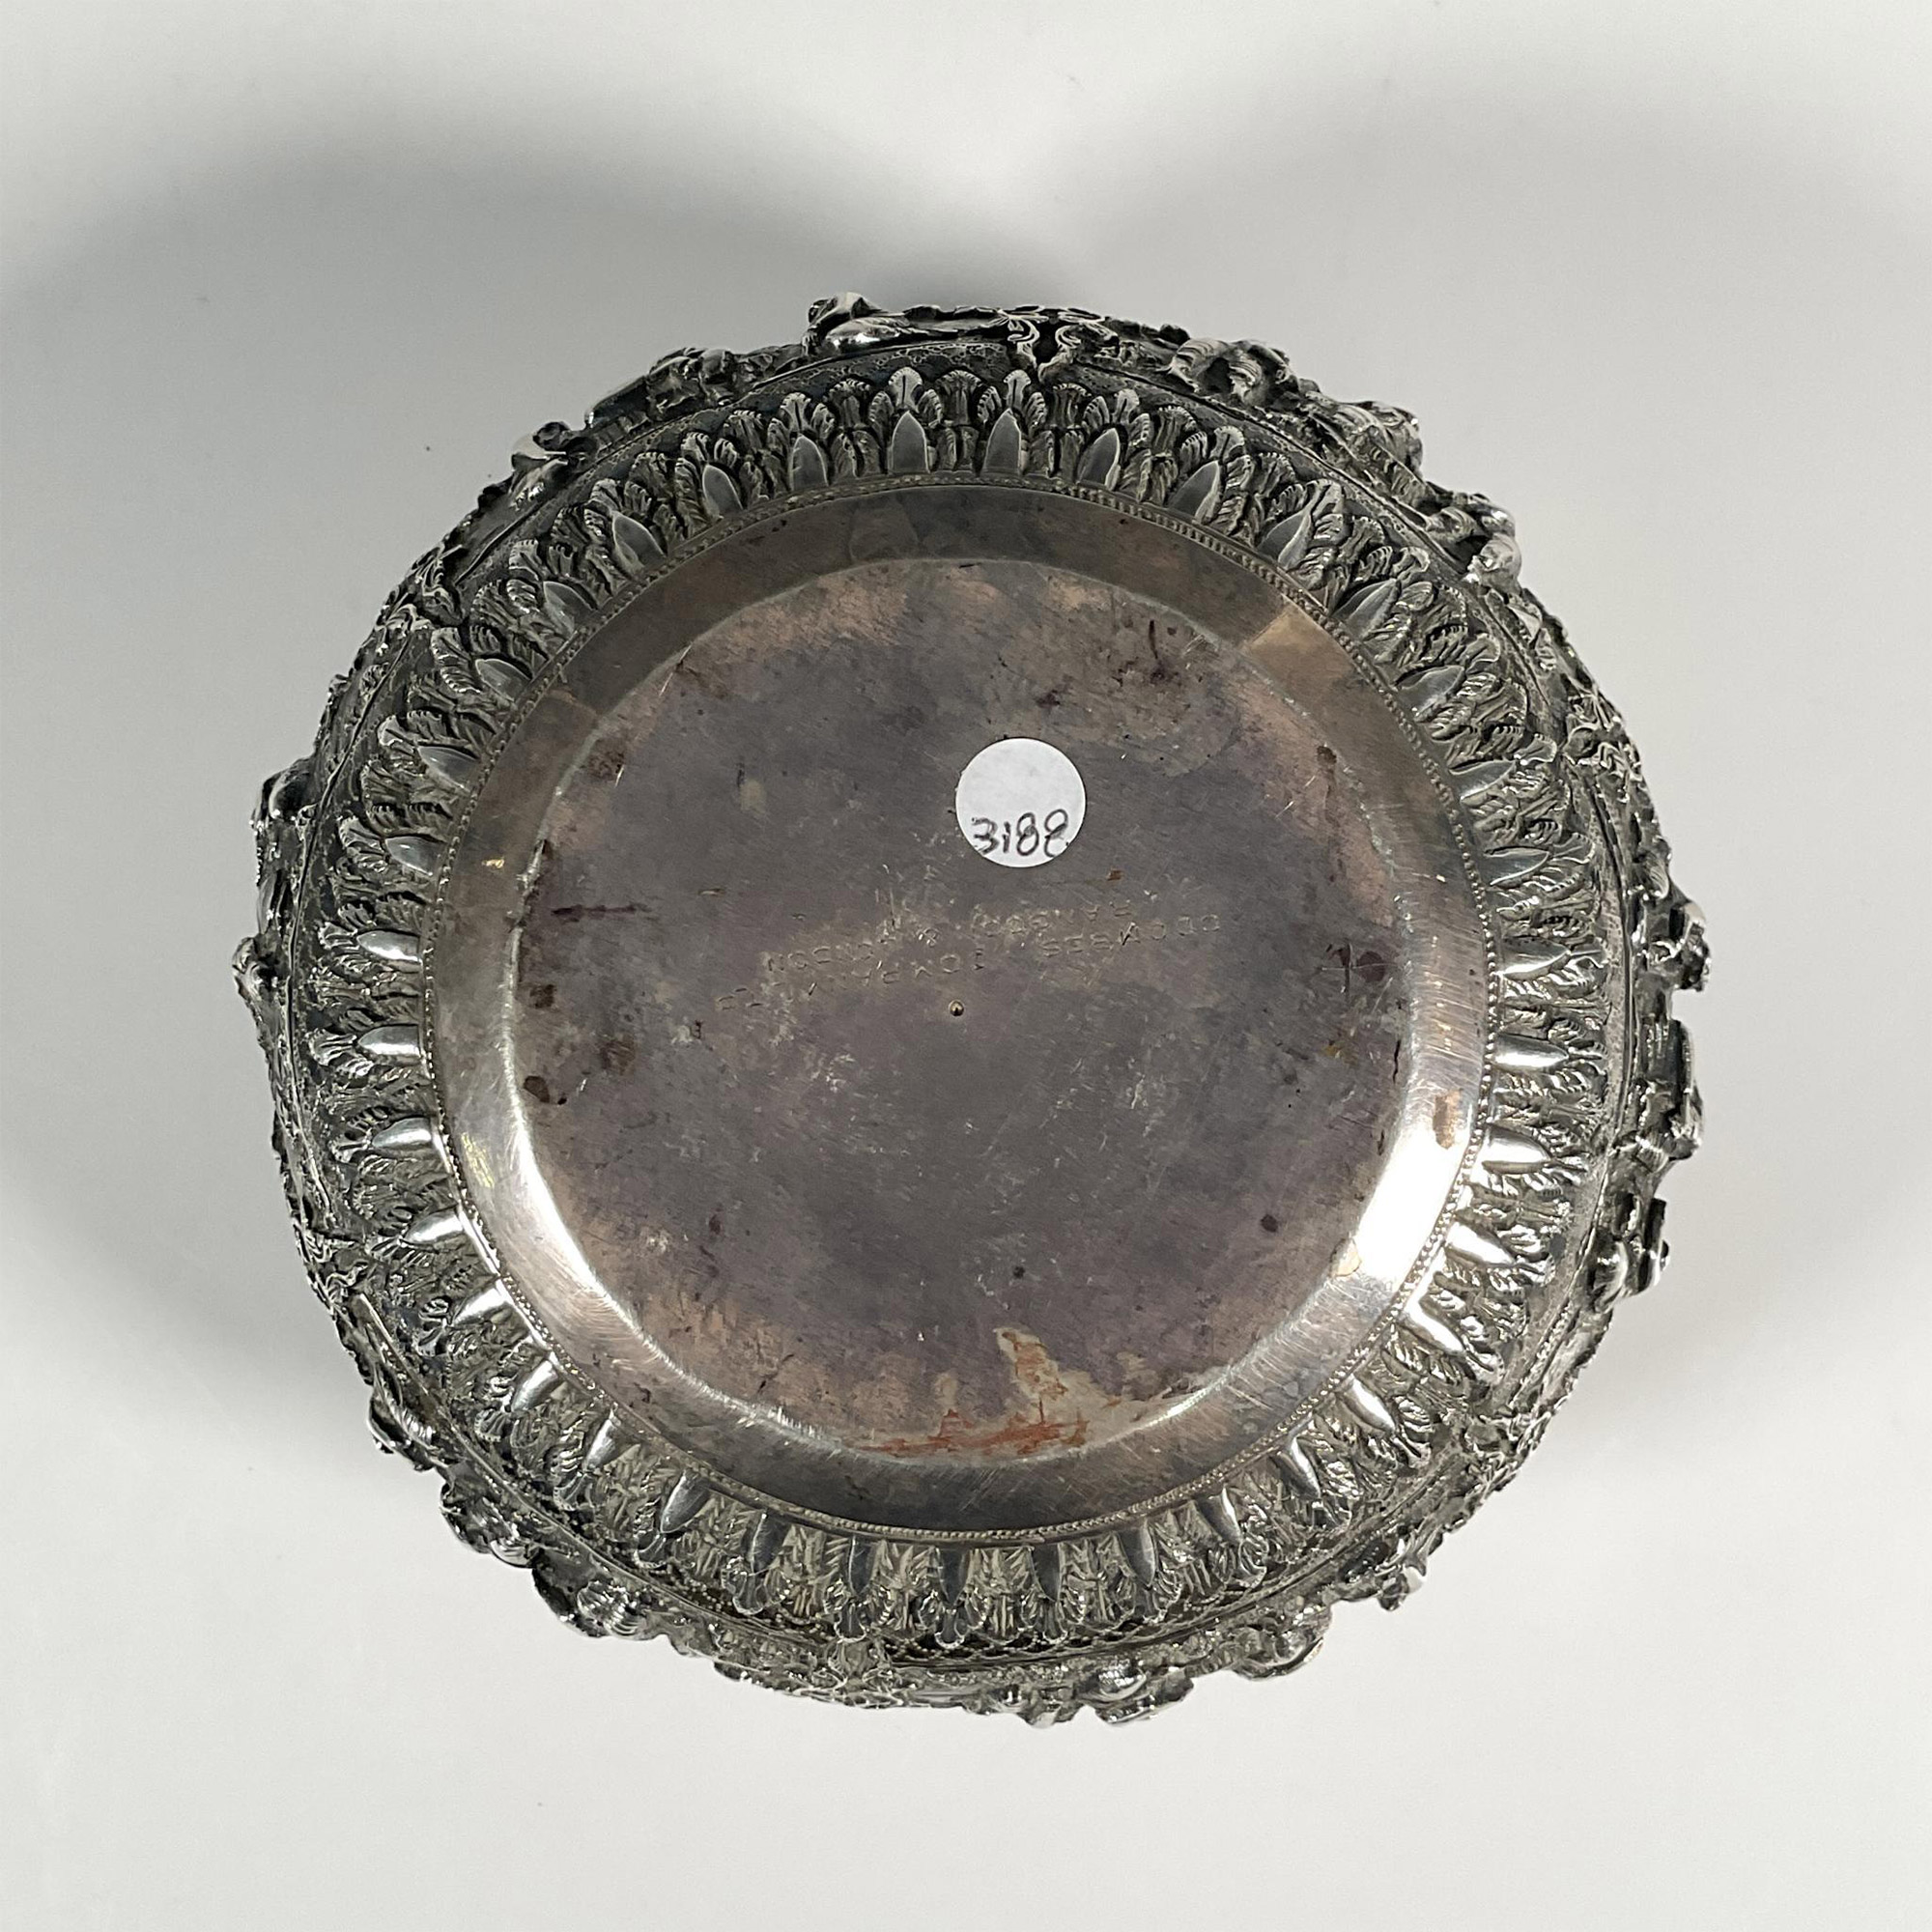 Coombes and Company Ltd. Burmese Silver Circular Bowl - Image 3 of 3